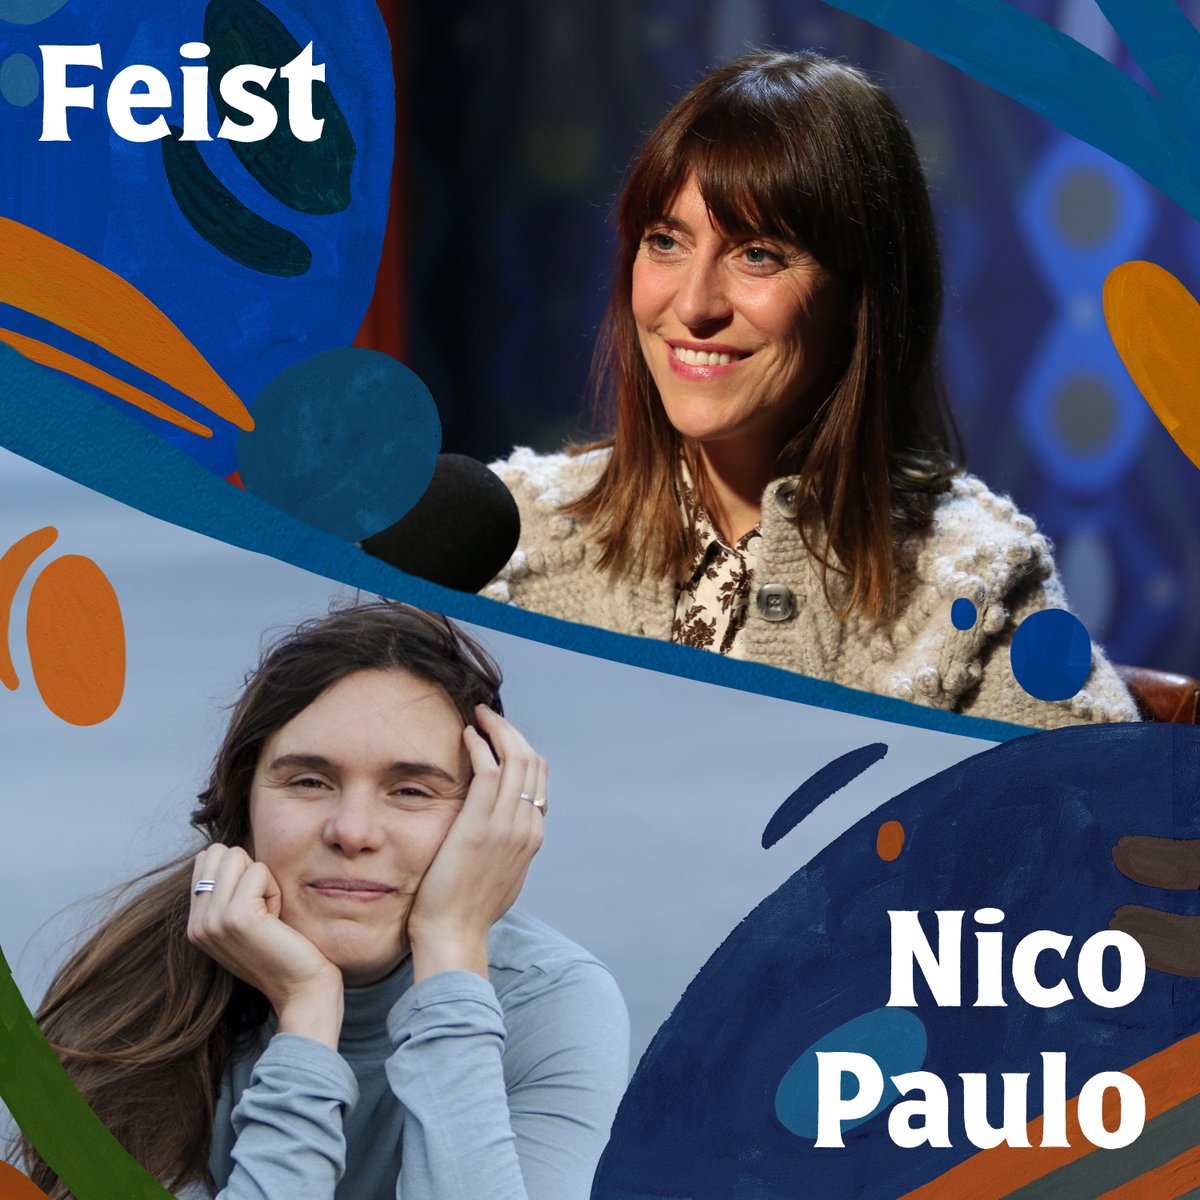 TODAY on Q with @tompowercbc: singer-songwriter @FeistMusic | musician Nico Paulo | link.chtbl.com/RniPnSsU